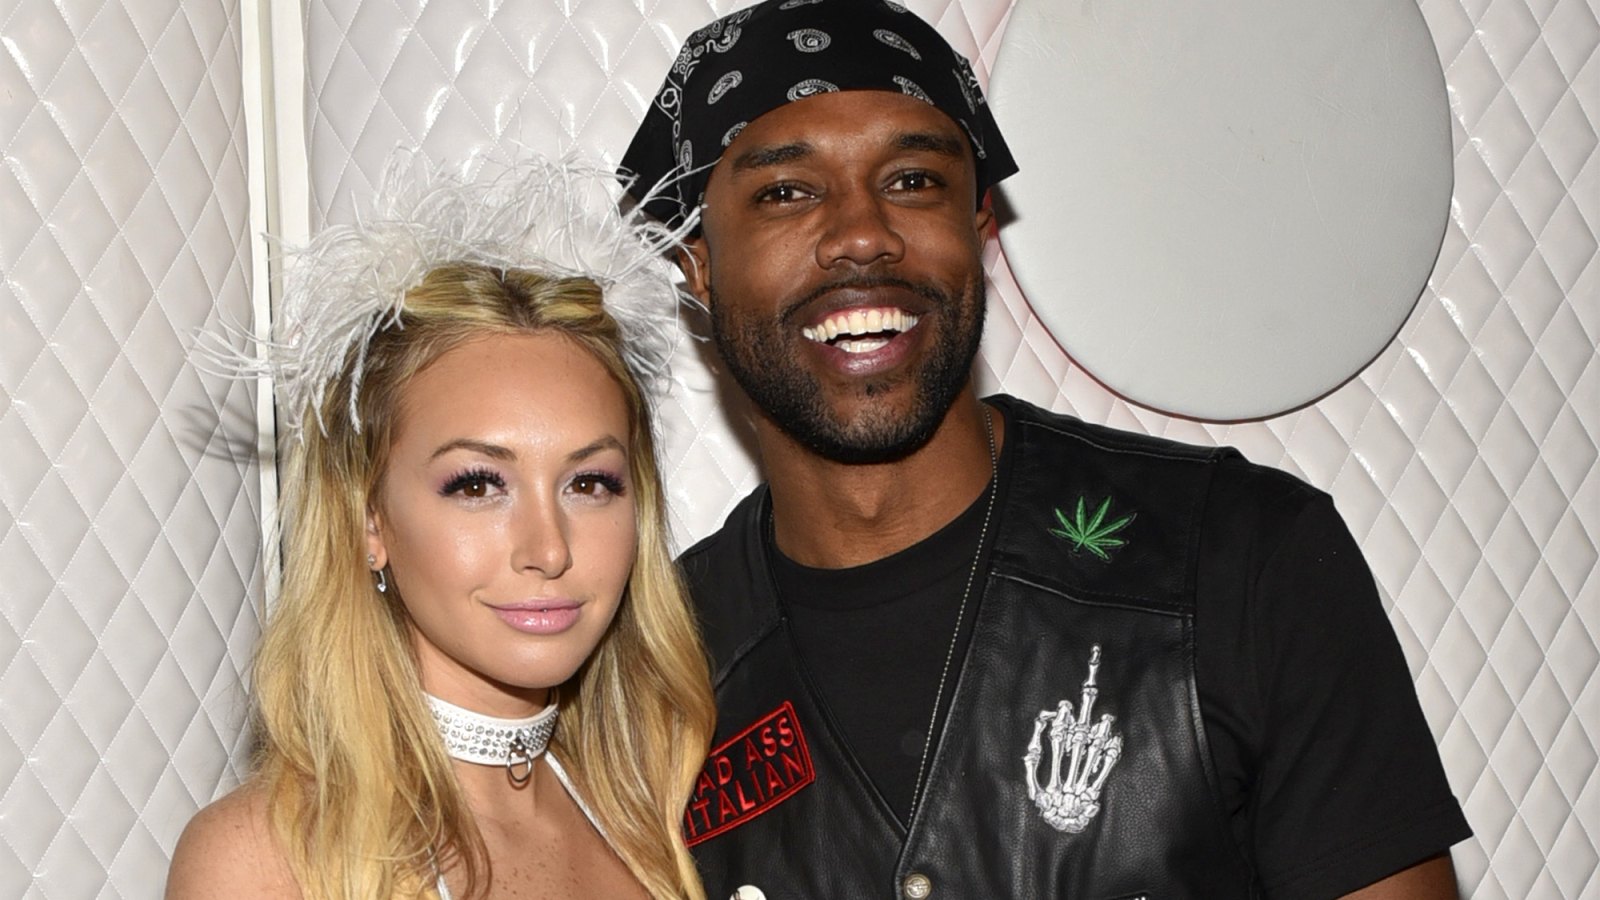 DeMario Jackson and Corinne Olympios arrive at the 2017 MAXIM Halloween Party